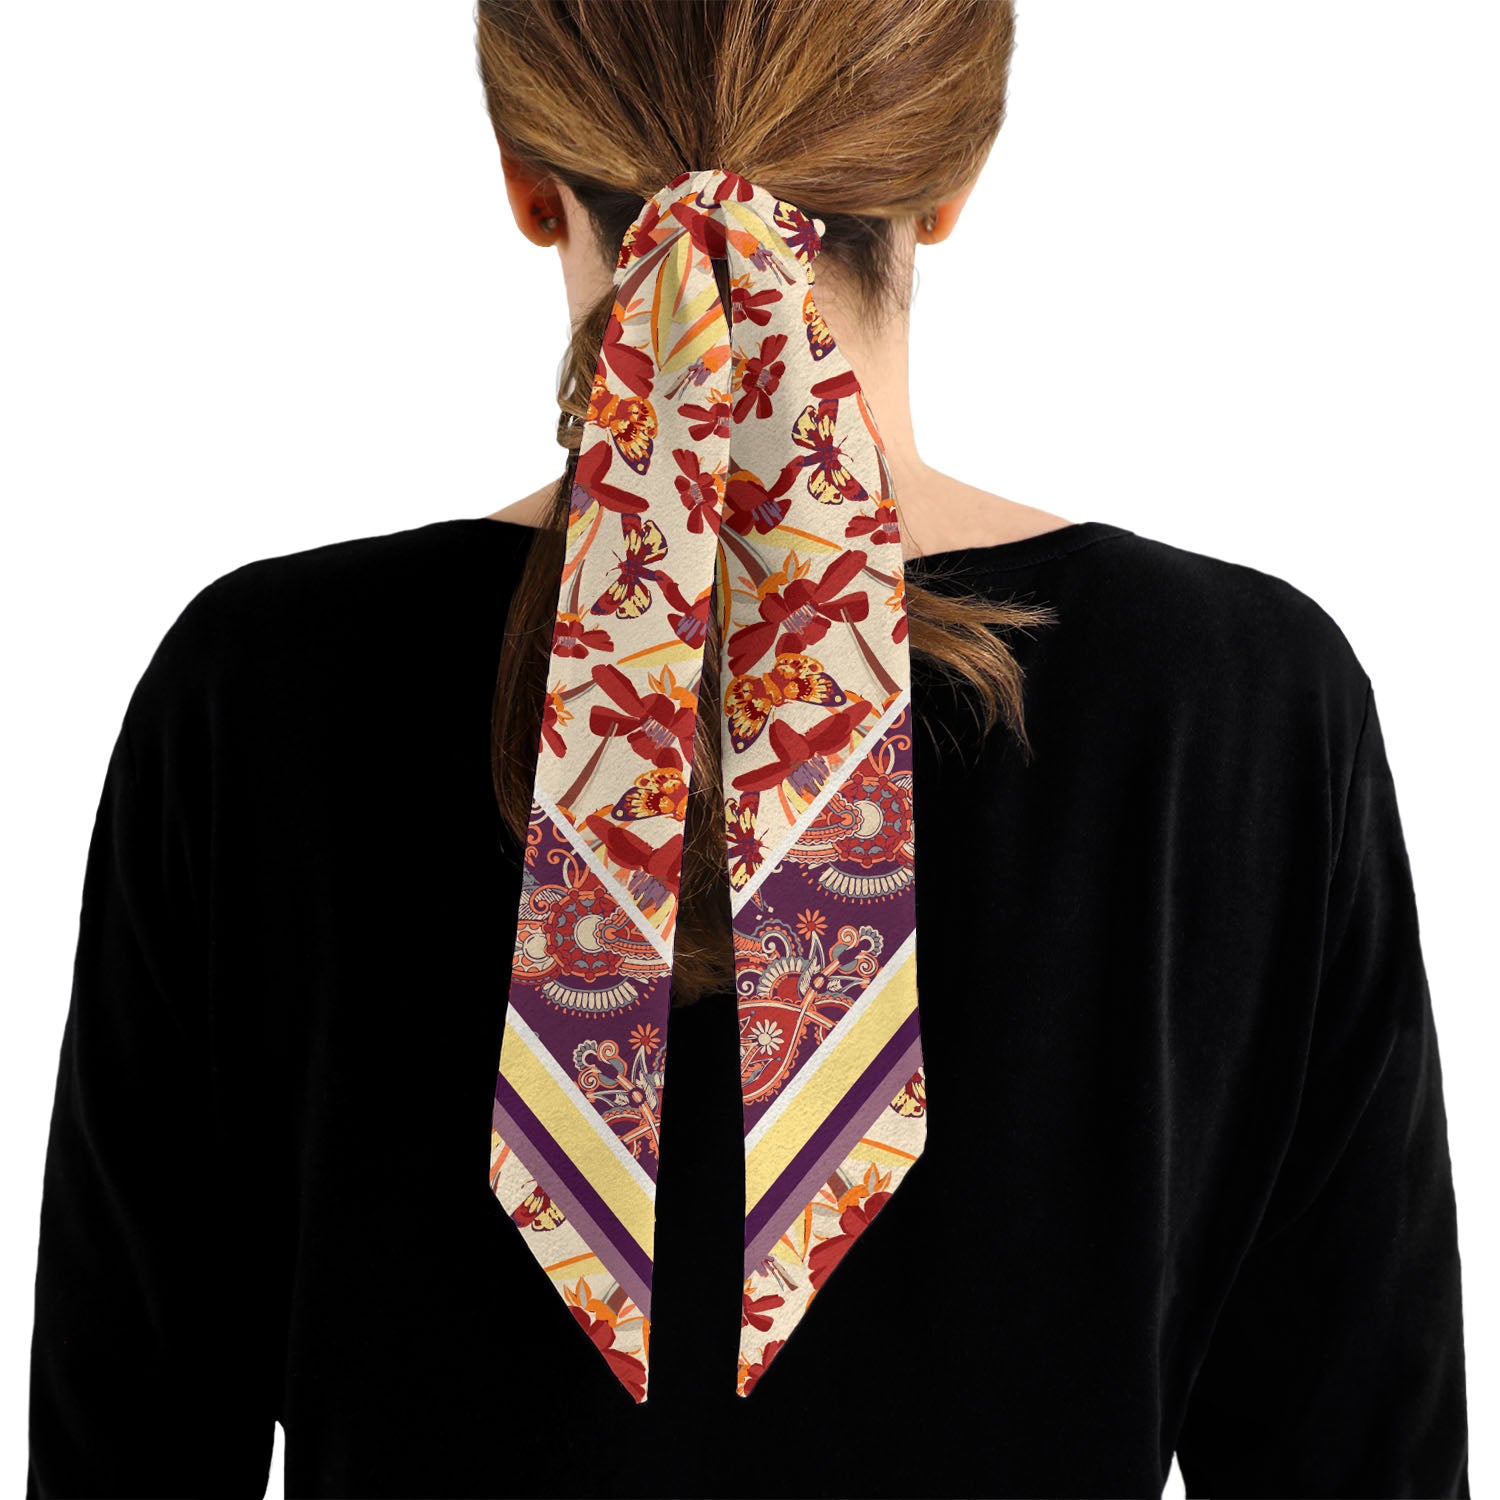 Knotty Tie Co. Butterfly Floral Paisley Hair Scarf